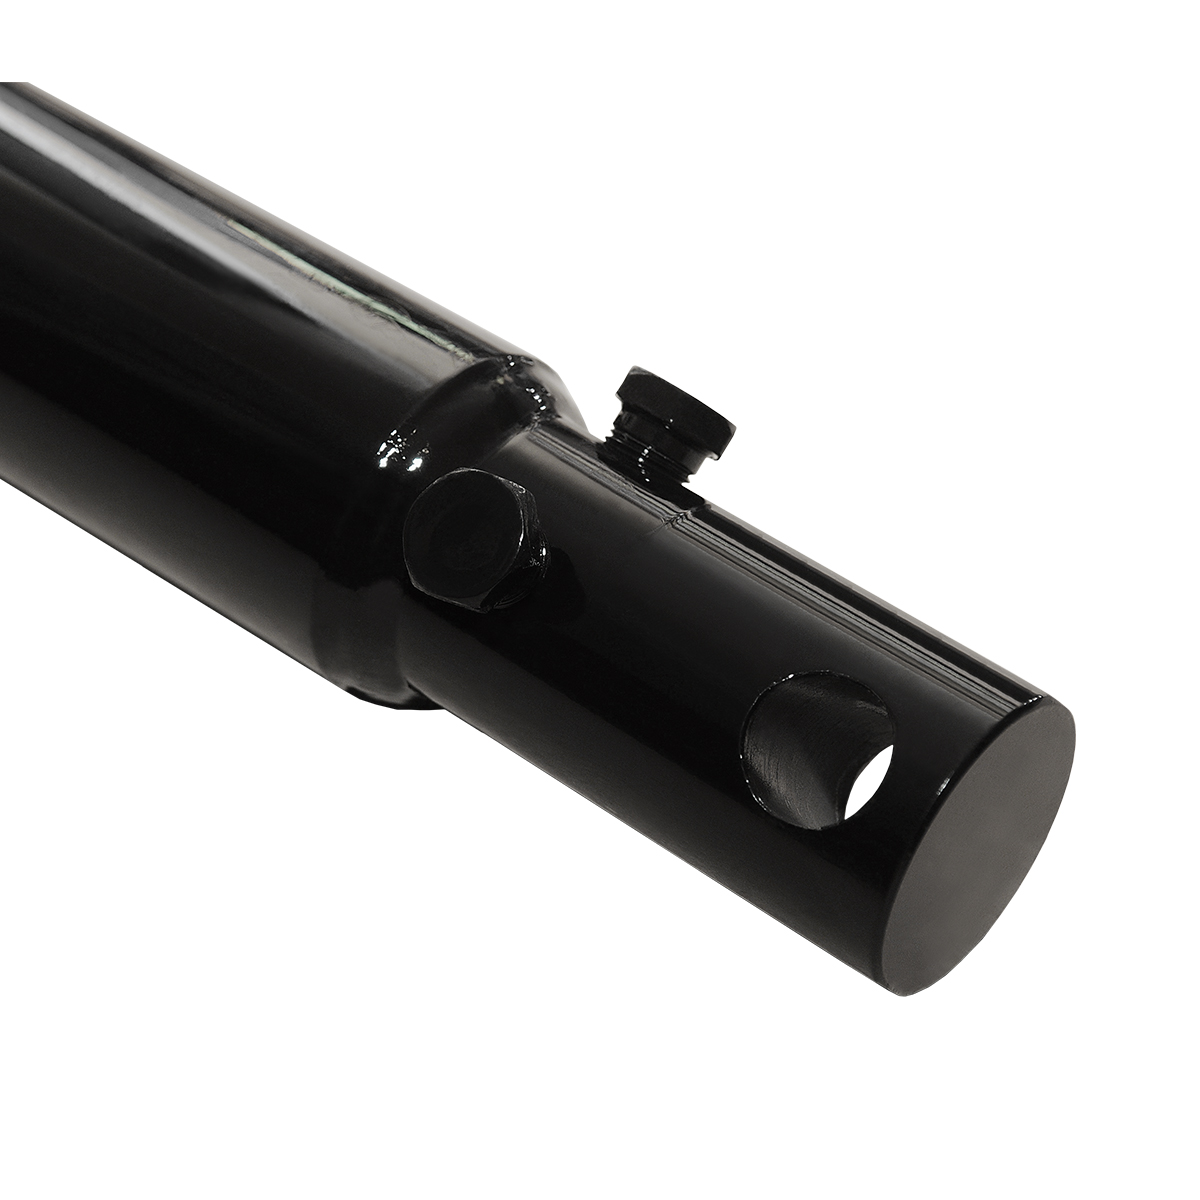 1.5 bore x 12 stroke hydraulic cylinder Fisher, welded snow plow single acting cylinder | Magister Hydraulics